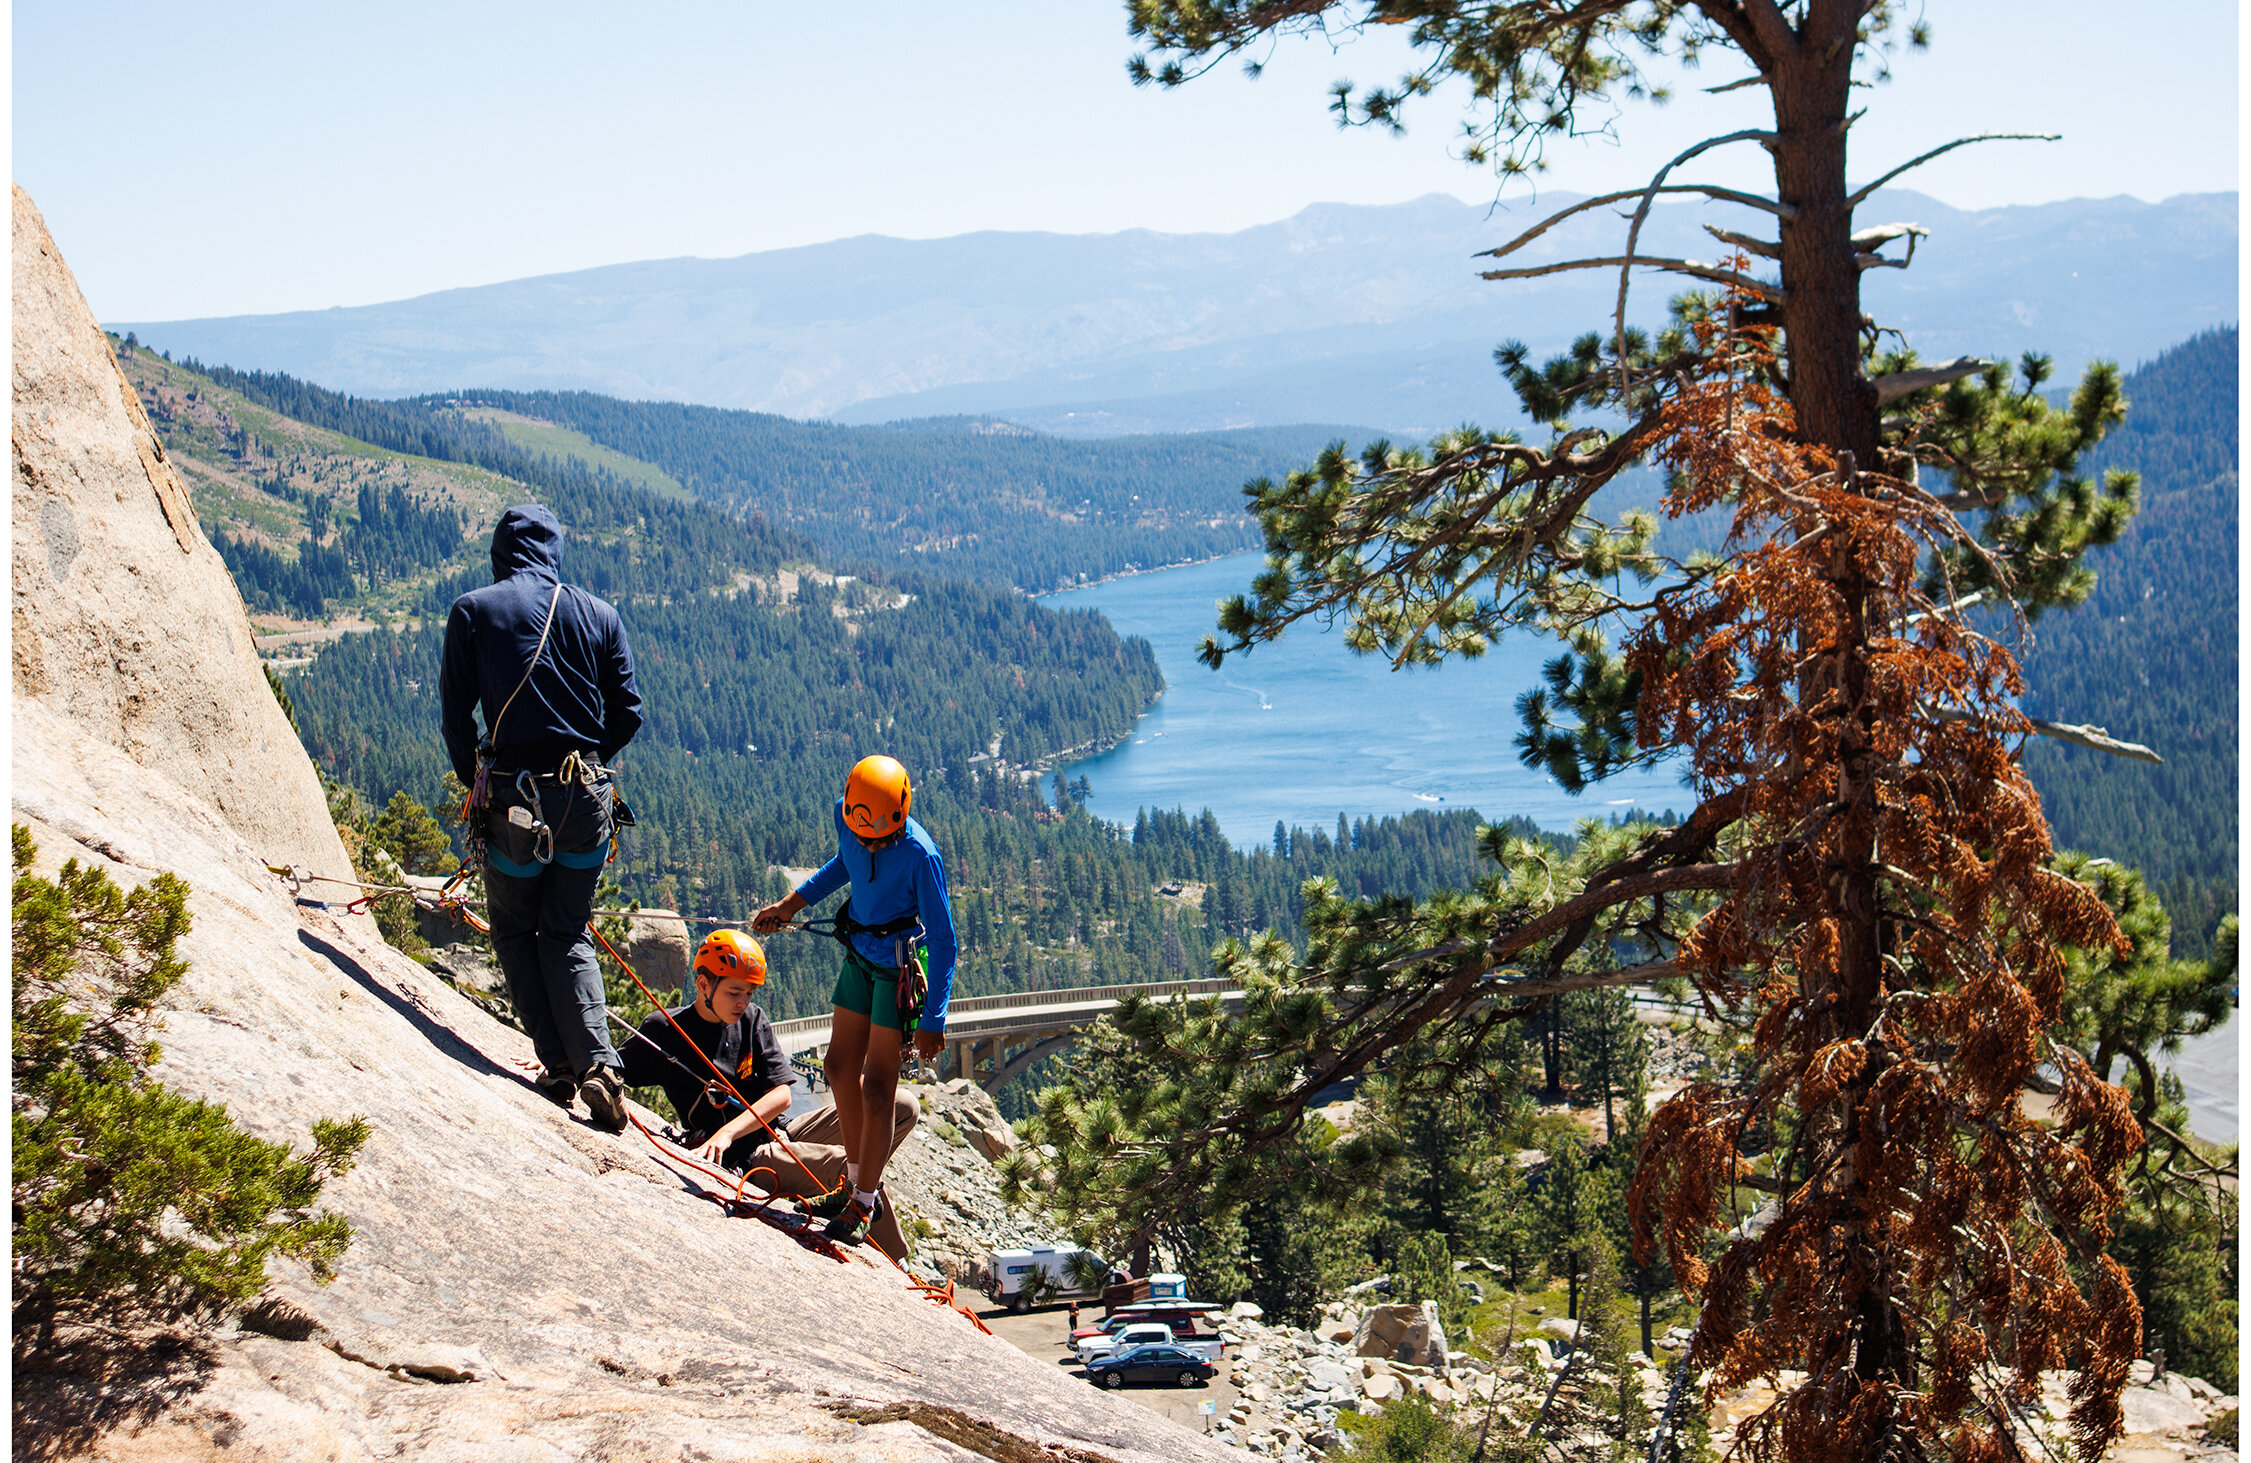 Our 5-Day Kids Rock Climbing Camp is a great way to get your kids outside for a week of activity and climbing development, whether they are new to the sport or have years of experience. Throughout the week, your child will climb on the Tahoe Via in Olympic Valley and on Donner Summit, as well as participate in several activities including map and compass scavenger hunts, knot tying, educational hikes in Shirley Canyon, and more.